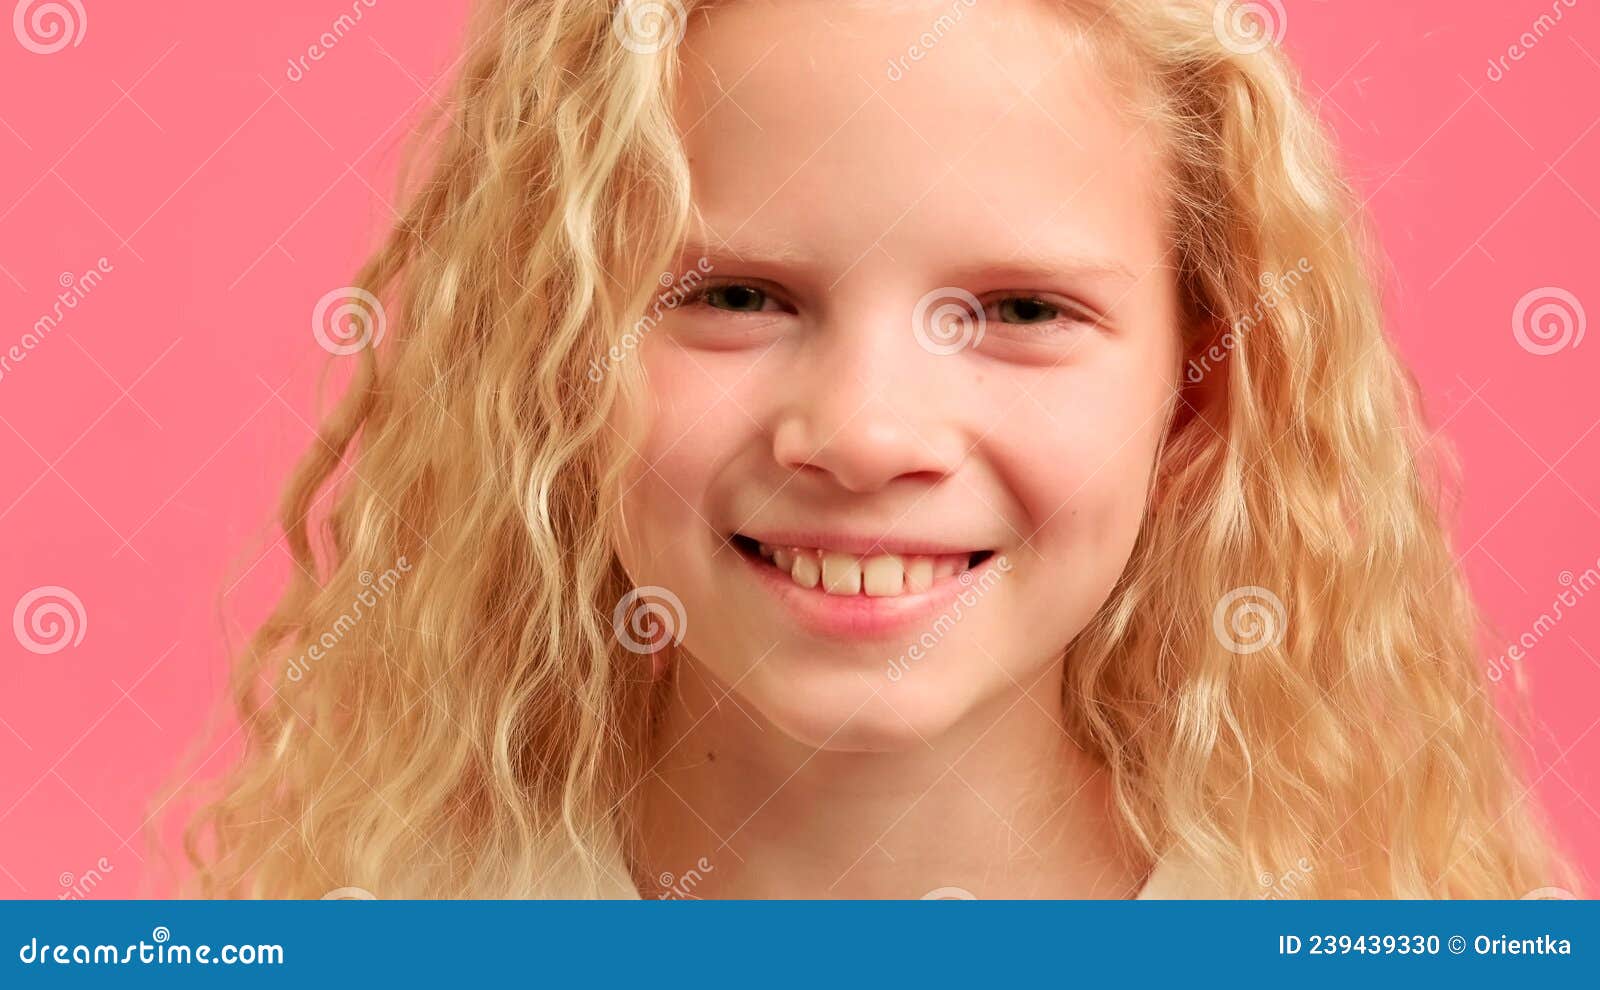 Close Up Portrait Of Blonde Teenage Girl Looks Into Camera And Smiles 